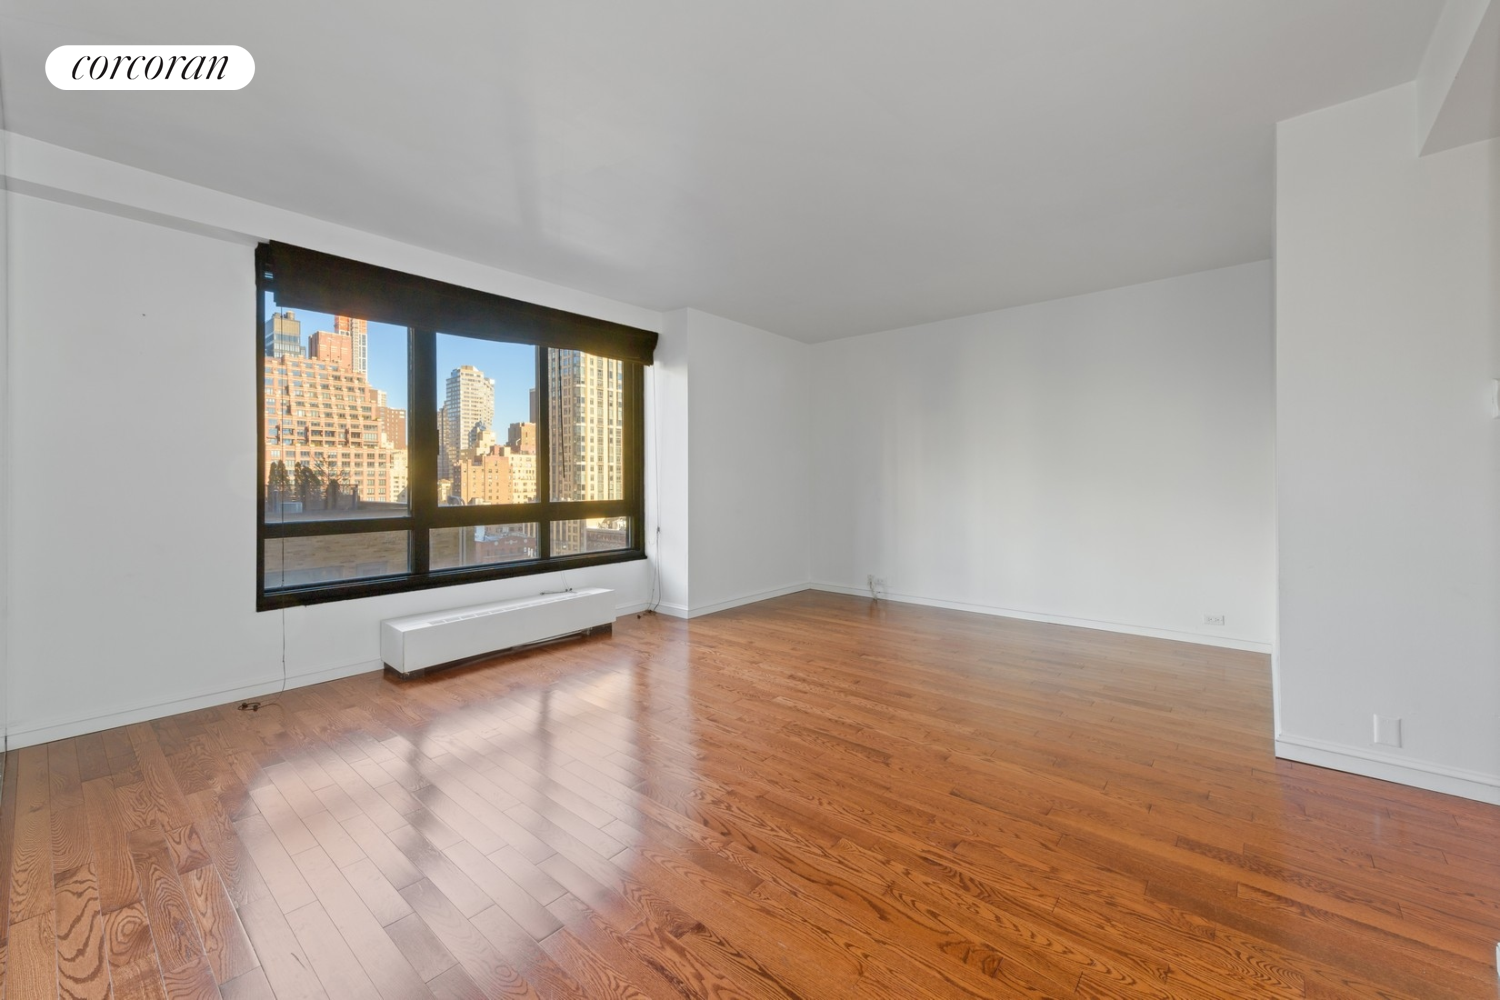 100 United Nations Plaza 15F, Turtle Bay, Midtown East, NYC - 1 Bedrooms  
1 Bathrooms  
3 Rooms - 